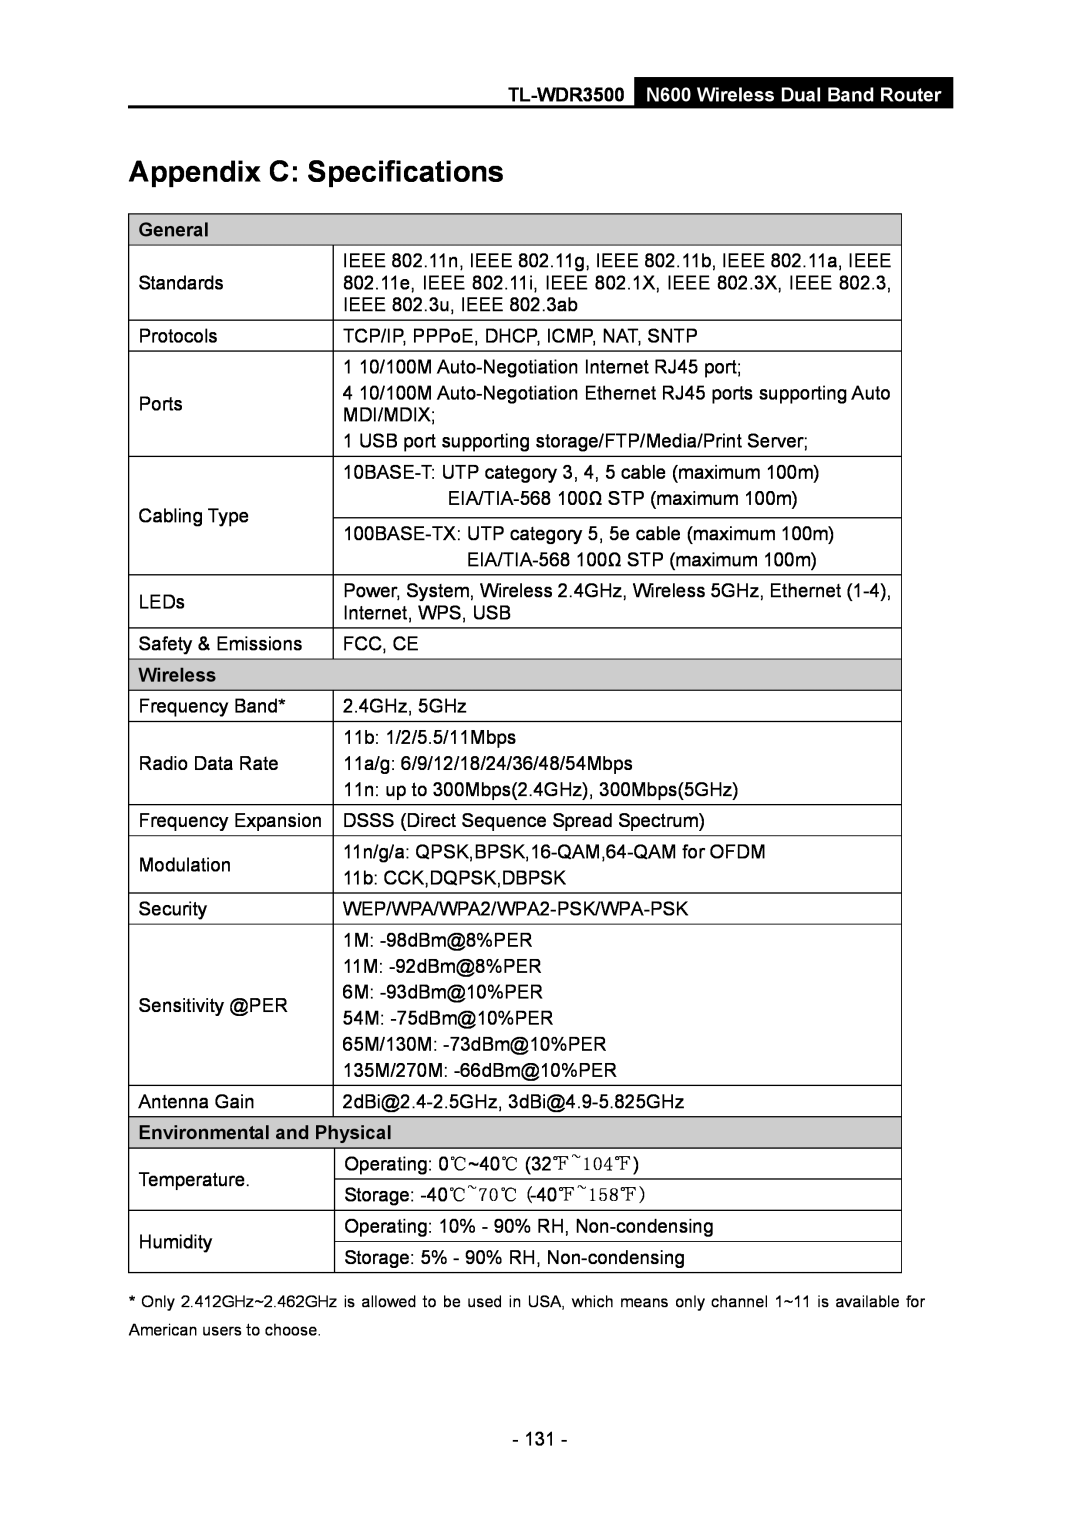 TP-Link TL-WDR3500 manual Appendix C Specifications, General, Wireless, Environmental and Physical 